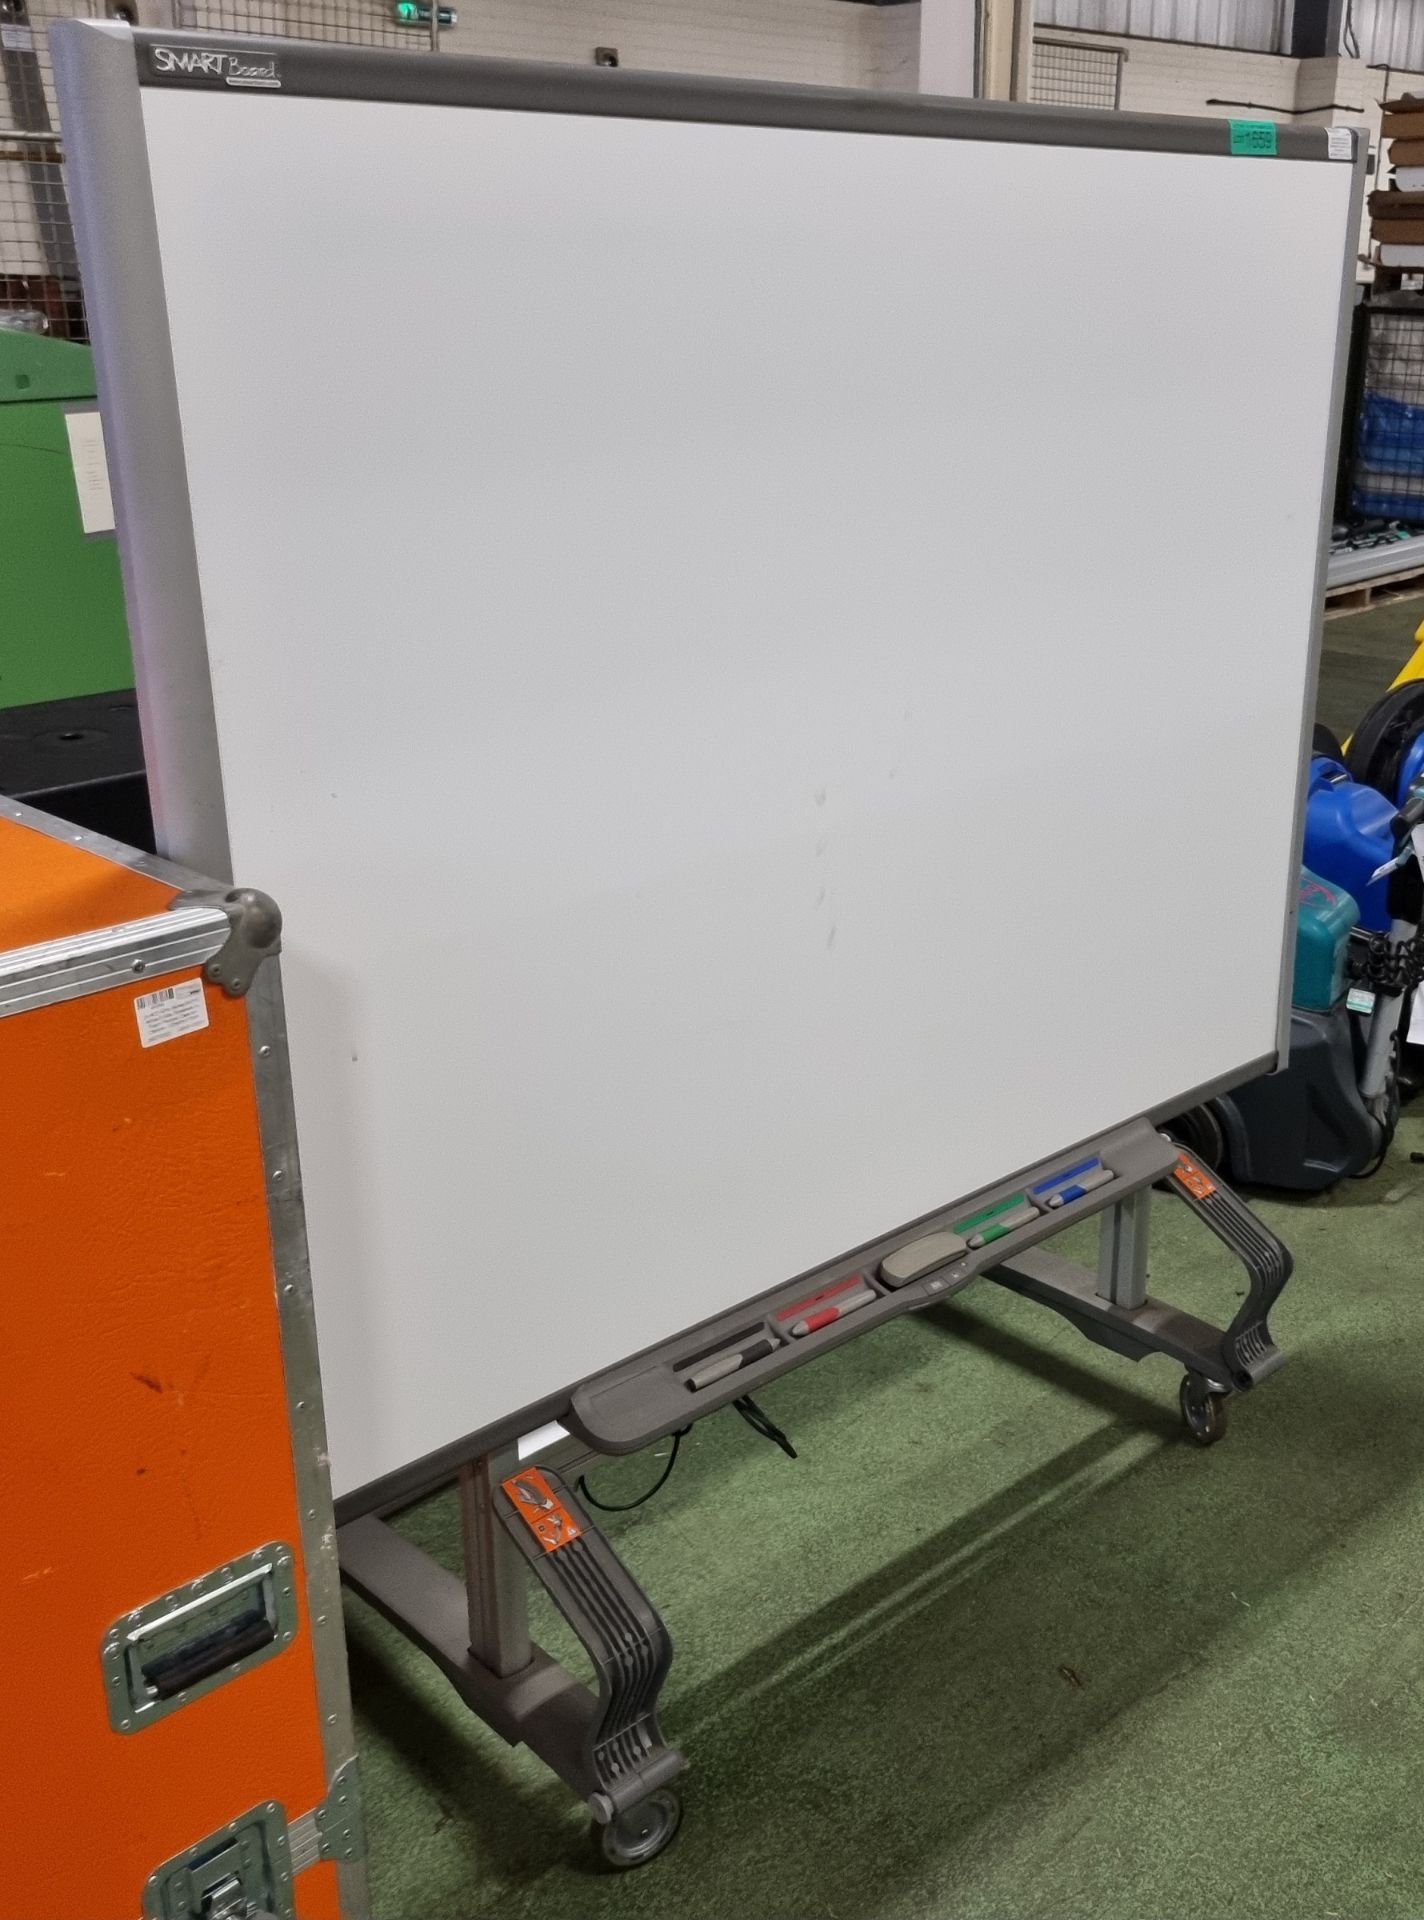 SMART SB680 mobile touch screen interactive whiteboard 77 in screen - wall mountable - Image 2 of 3